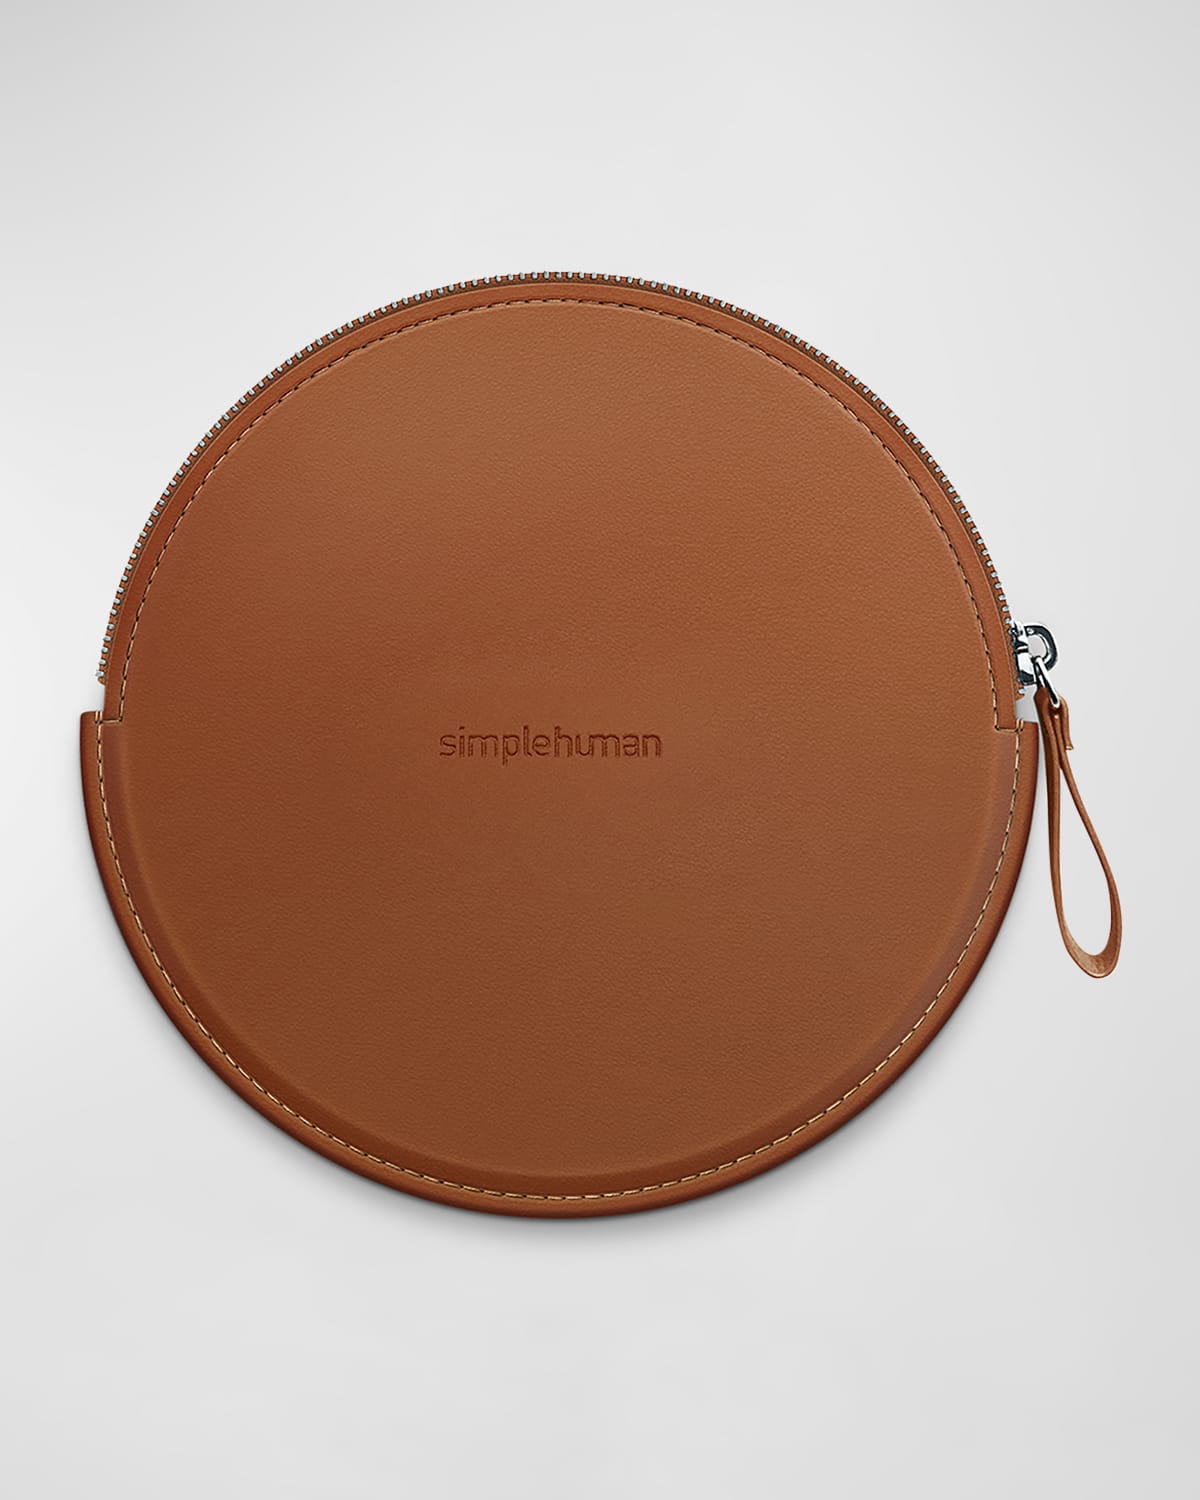 Simplehuman Sensor Mirror Compact Zip Case, Hand-stitched Vegan Leather In Brown